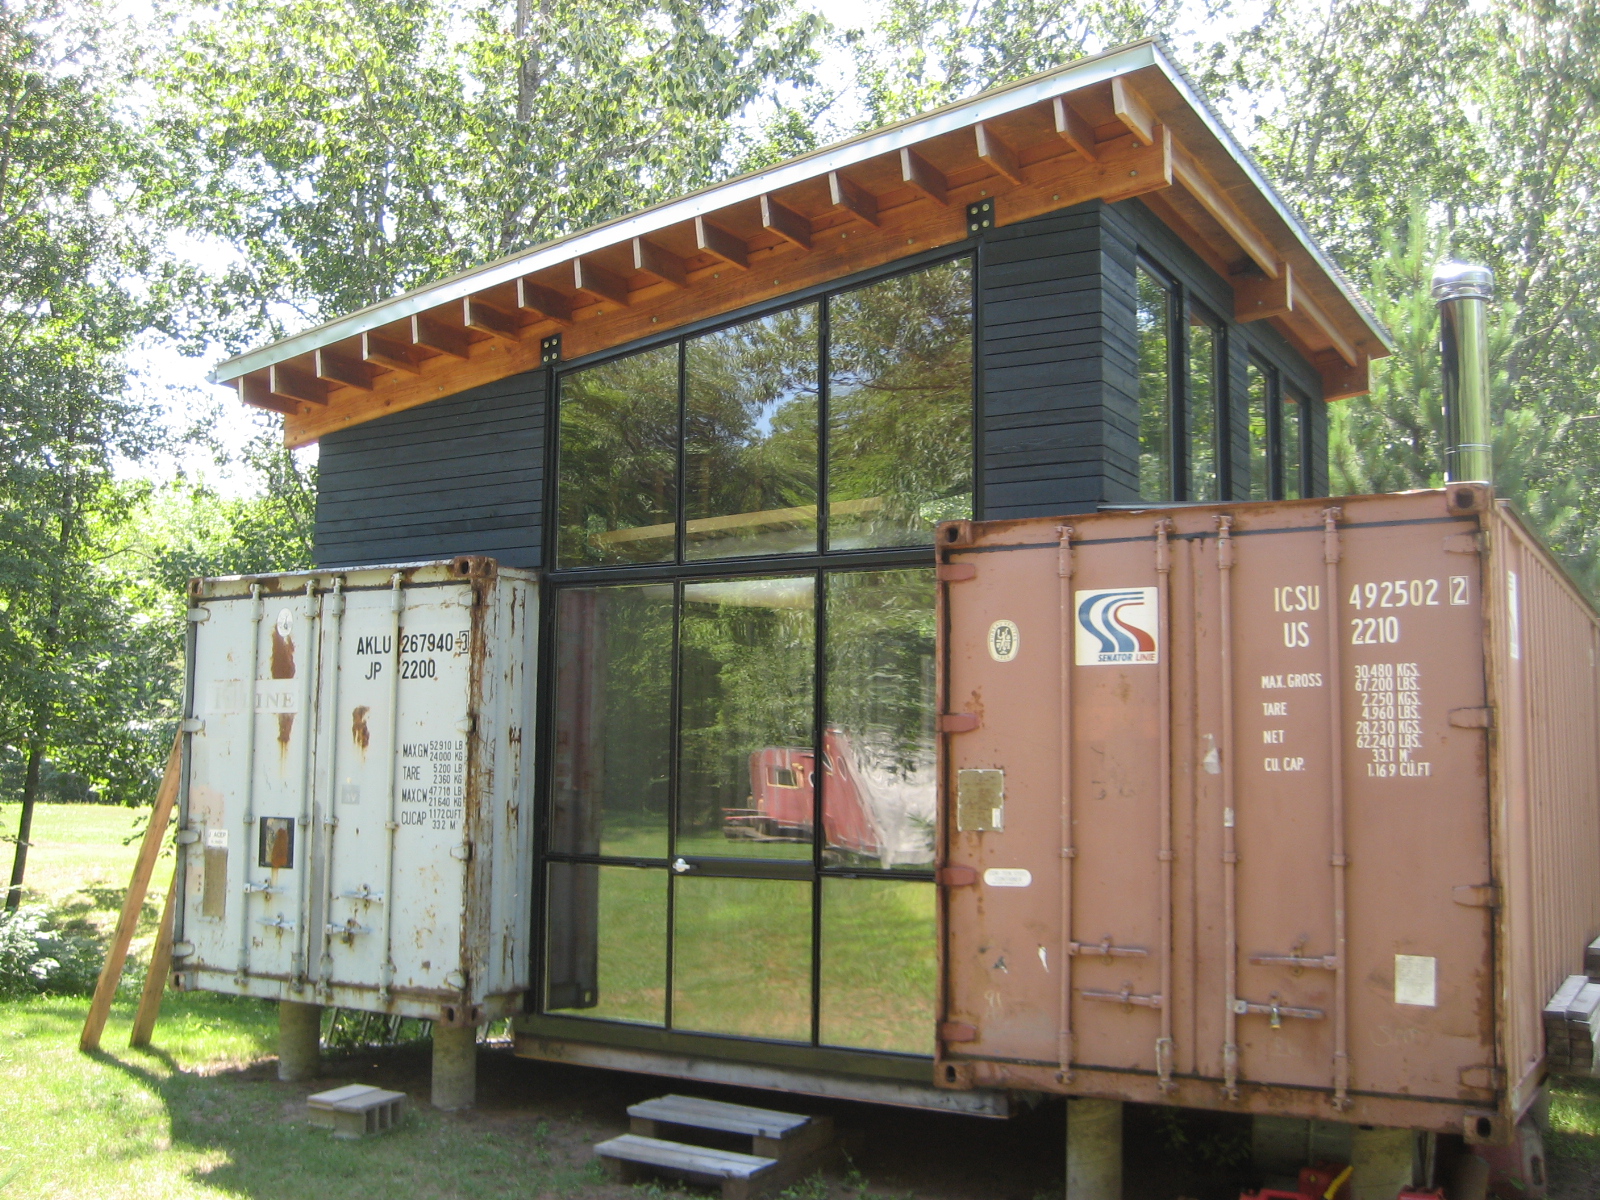 https://commons.wikimedia.org/wiki/File:ShippingContainerCottage.jpg